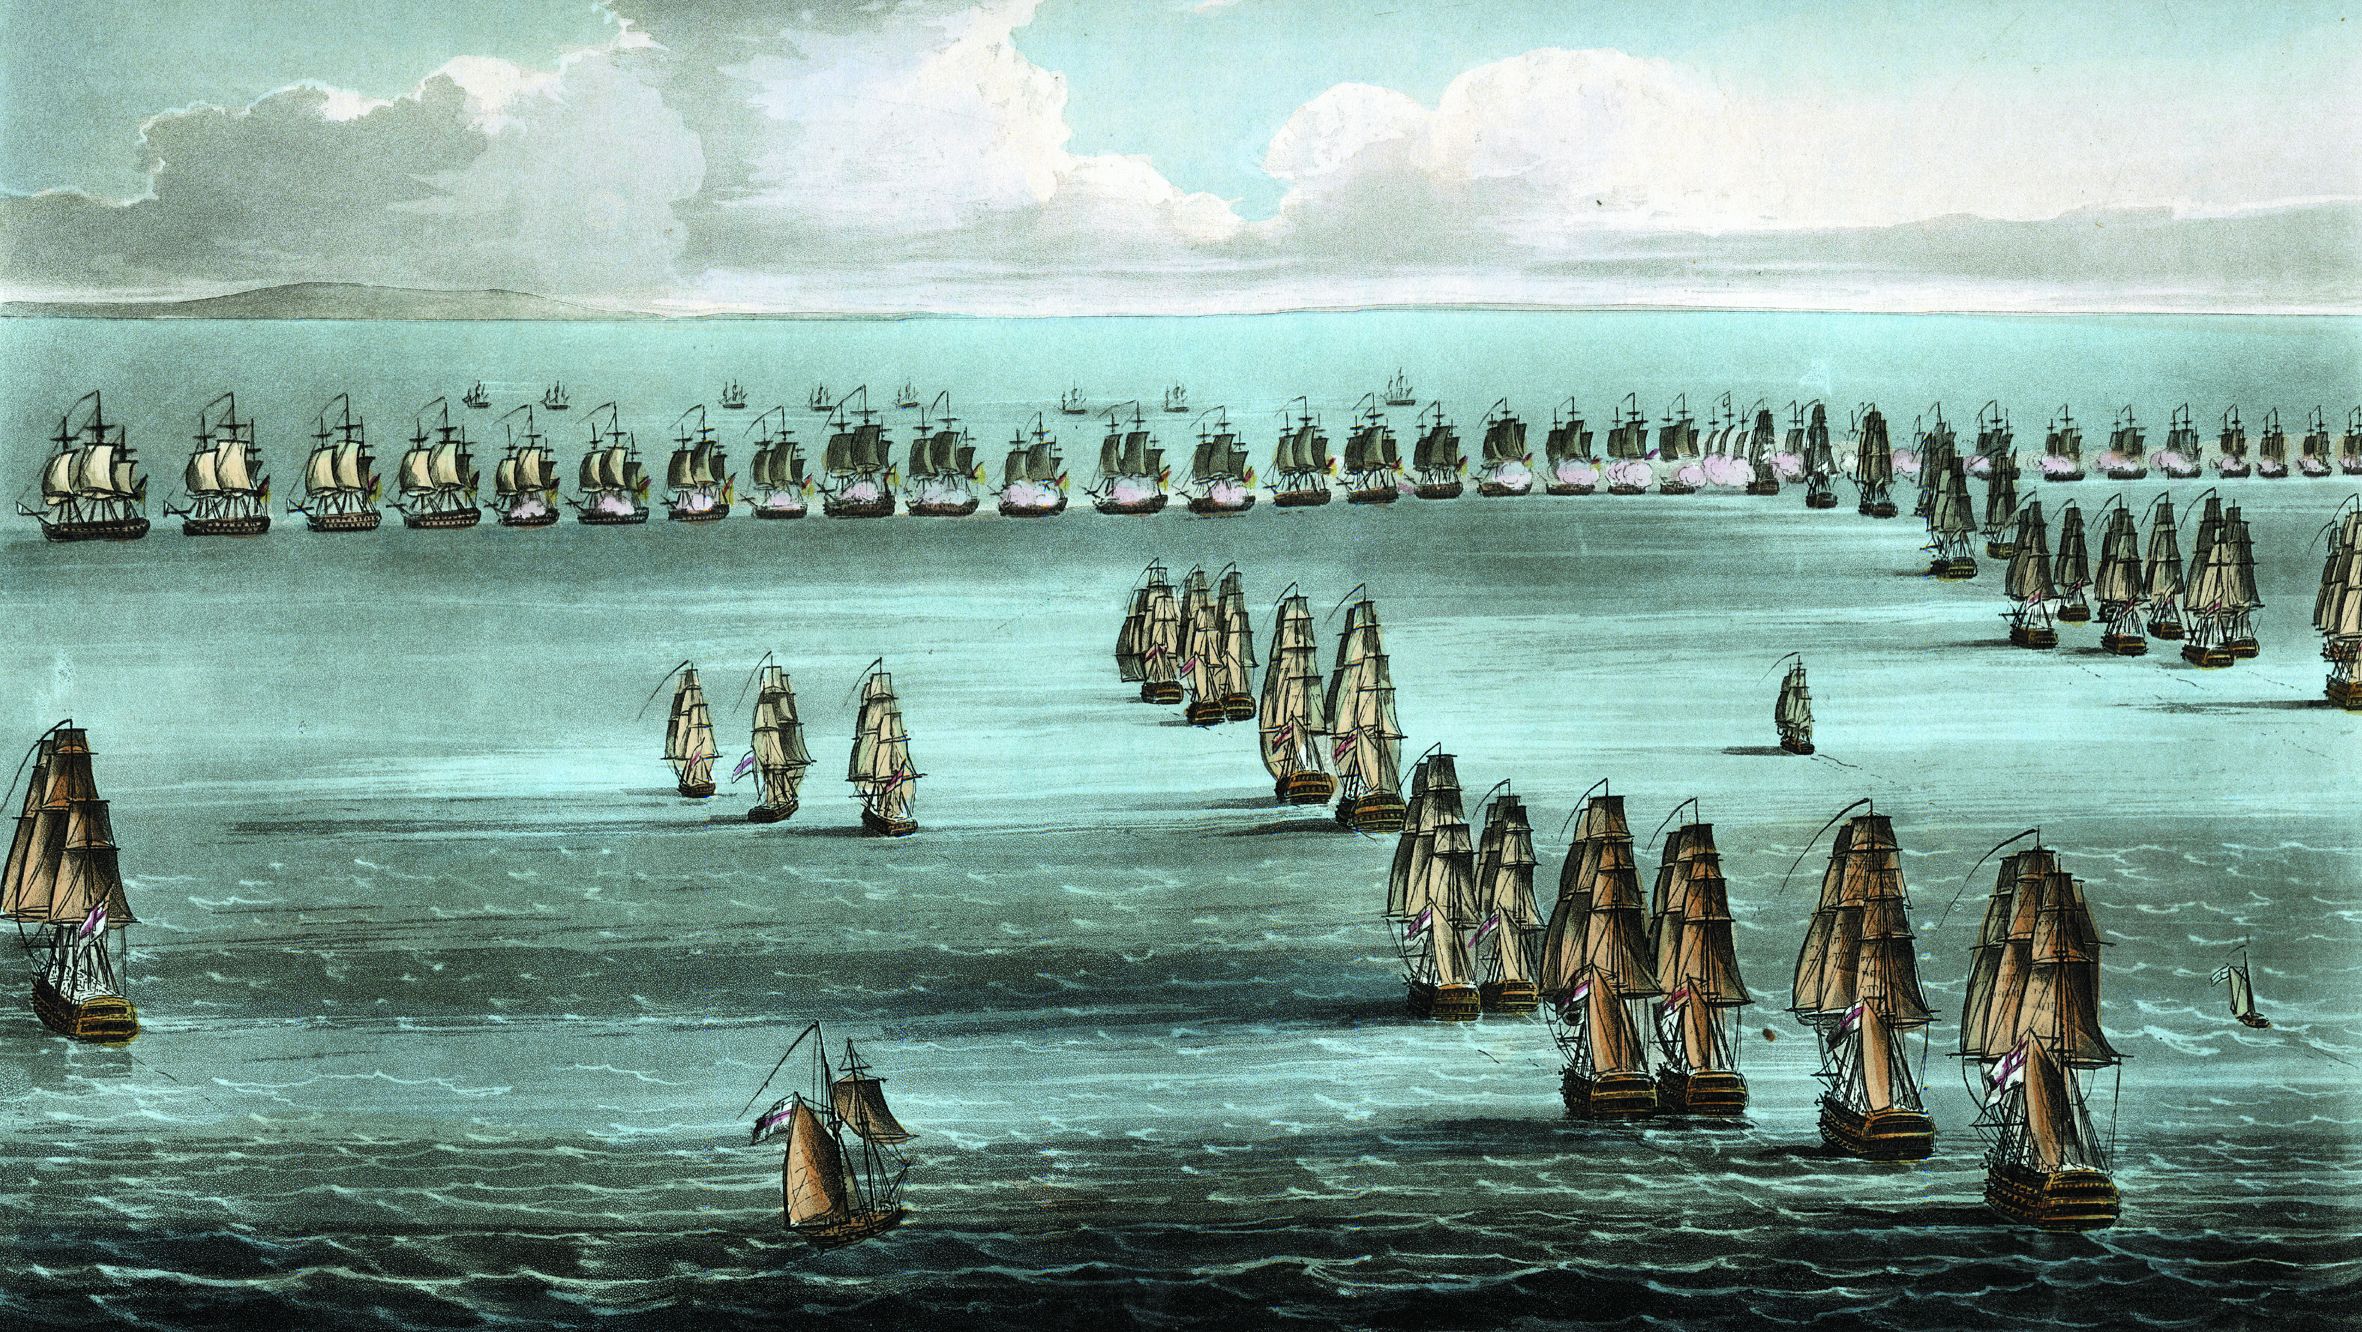 French warships wait in a conventional battle line for the oncoming British ships. “England expects that every 
man will do his duty,” Nelson famously signaled his sailors and marines.